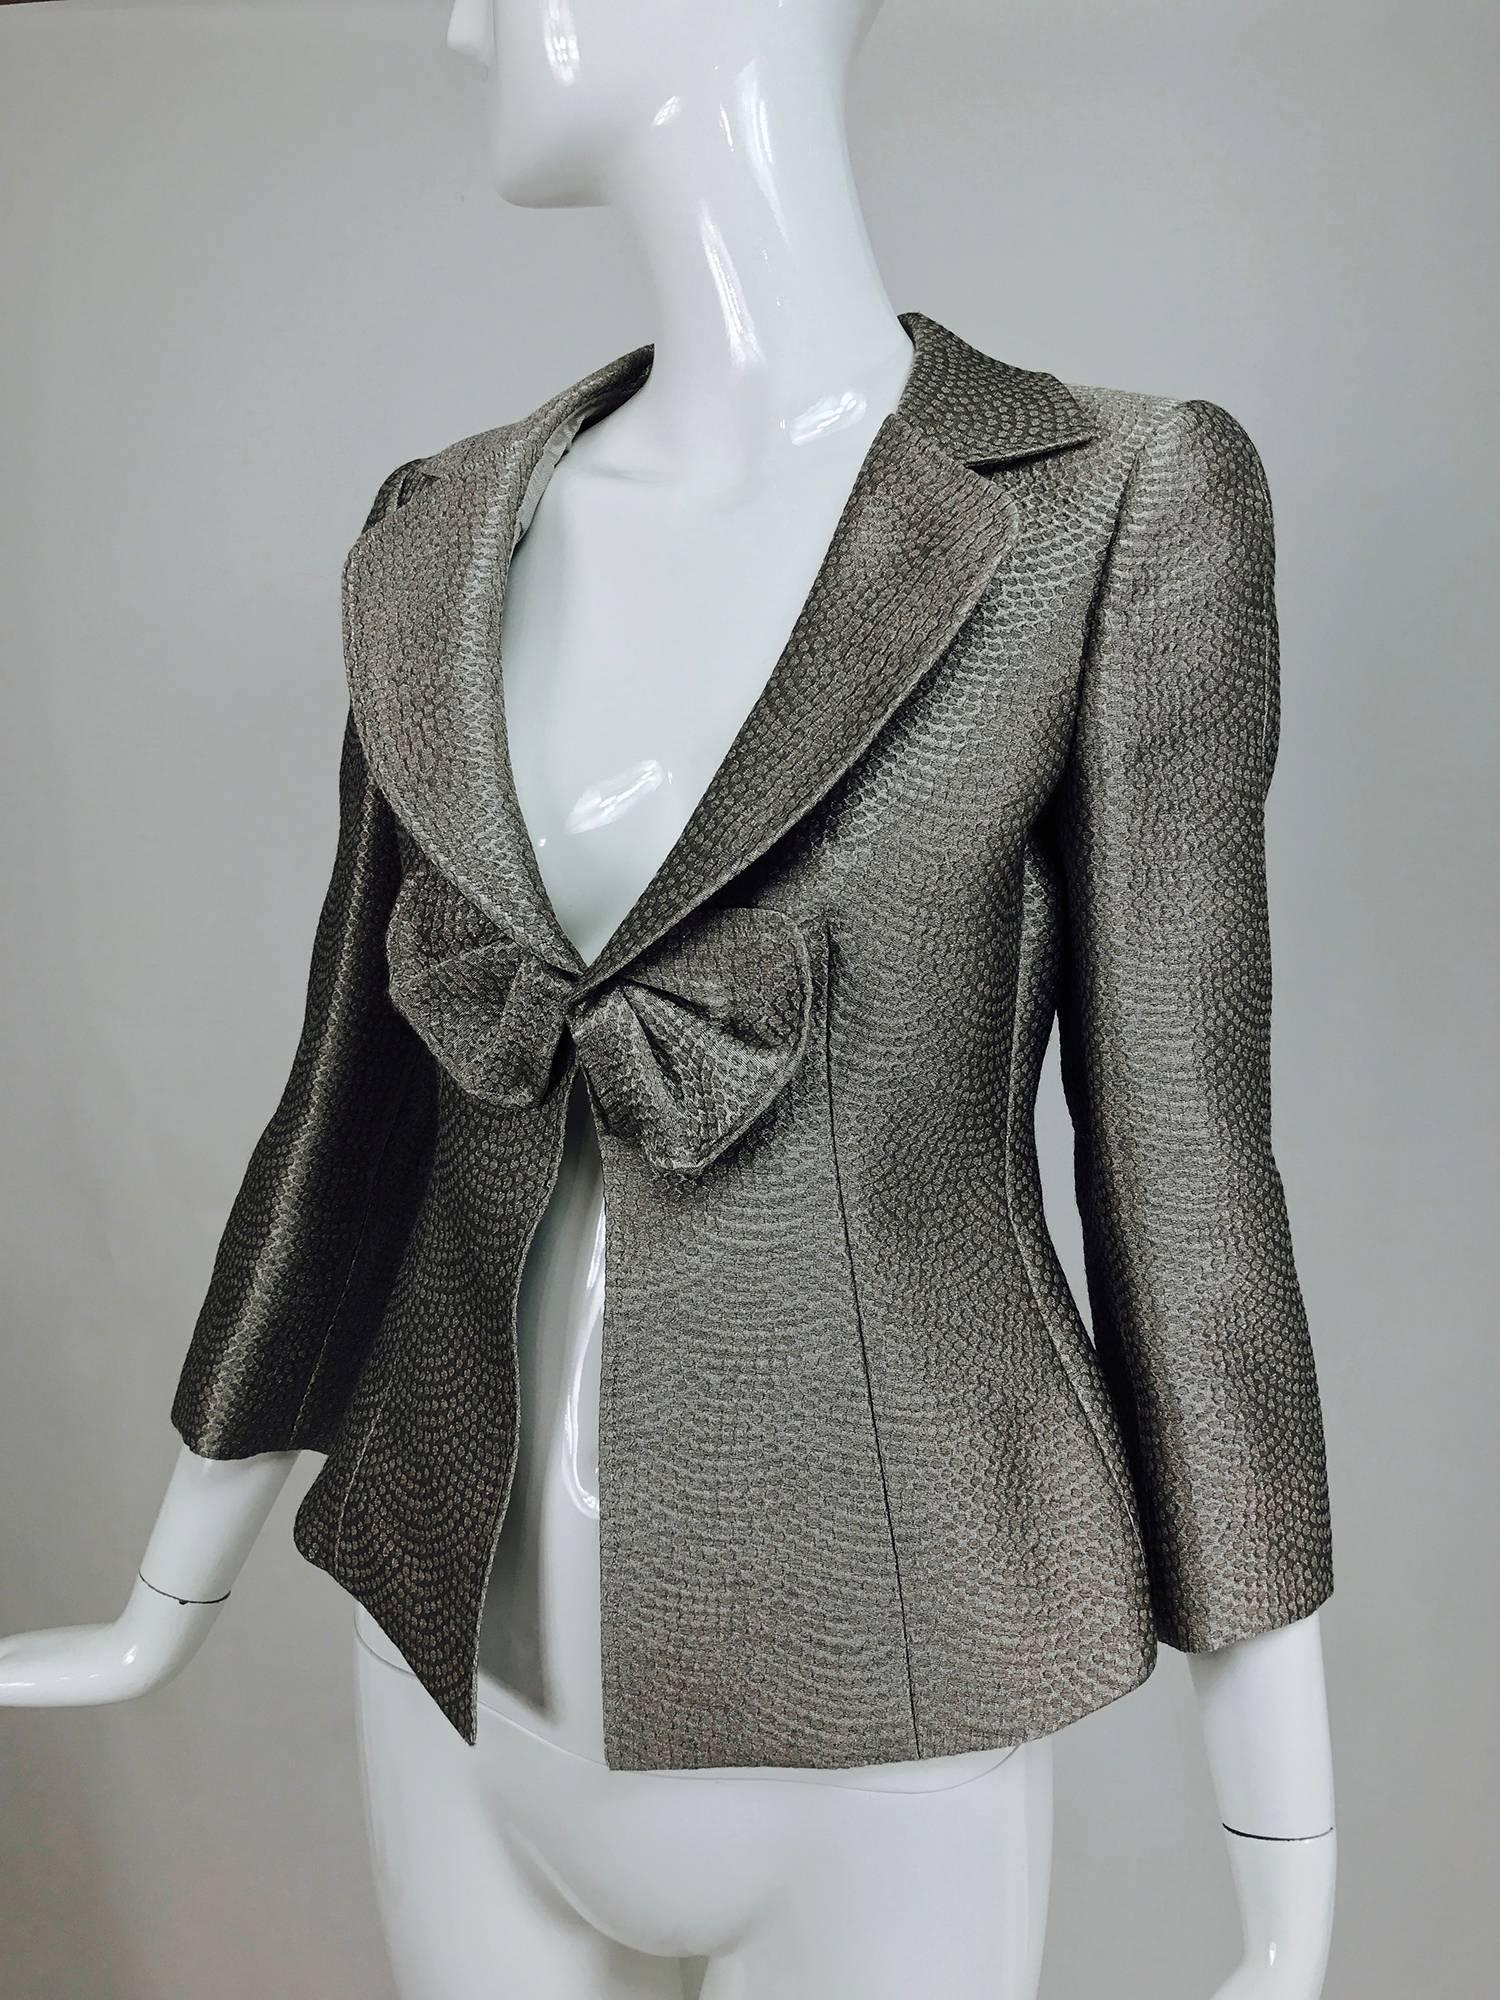 Armani Collezioni textured silver metallic plunge bow front jacket...Sexy jacket in an unusual wool blend jacket (doesn't feel like wool)...Princess seamed front and back, 3/4 length sleeves...Bow with hidden button closure at the low bust...Marked